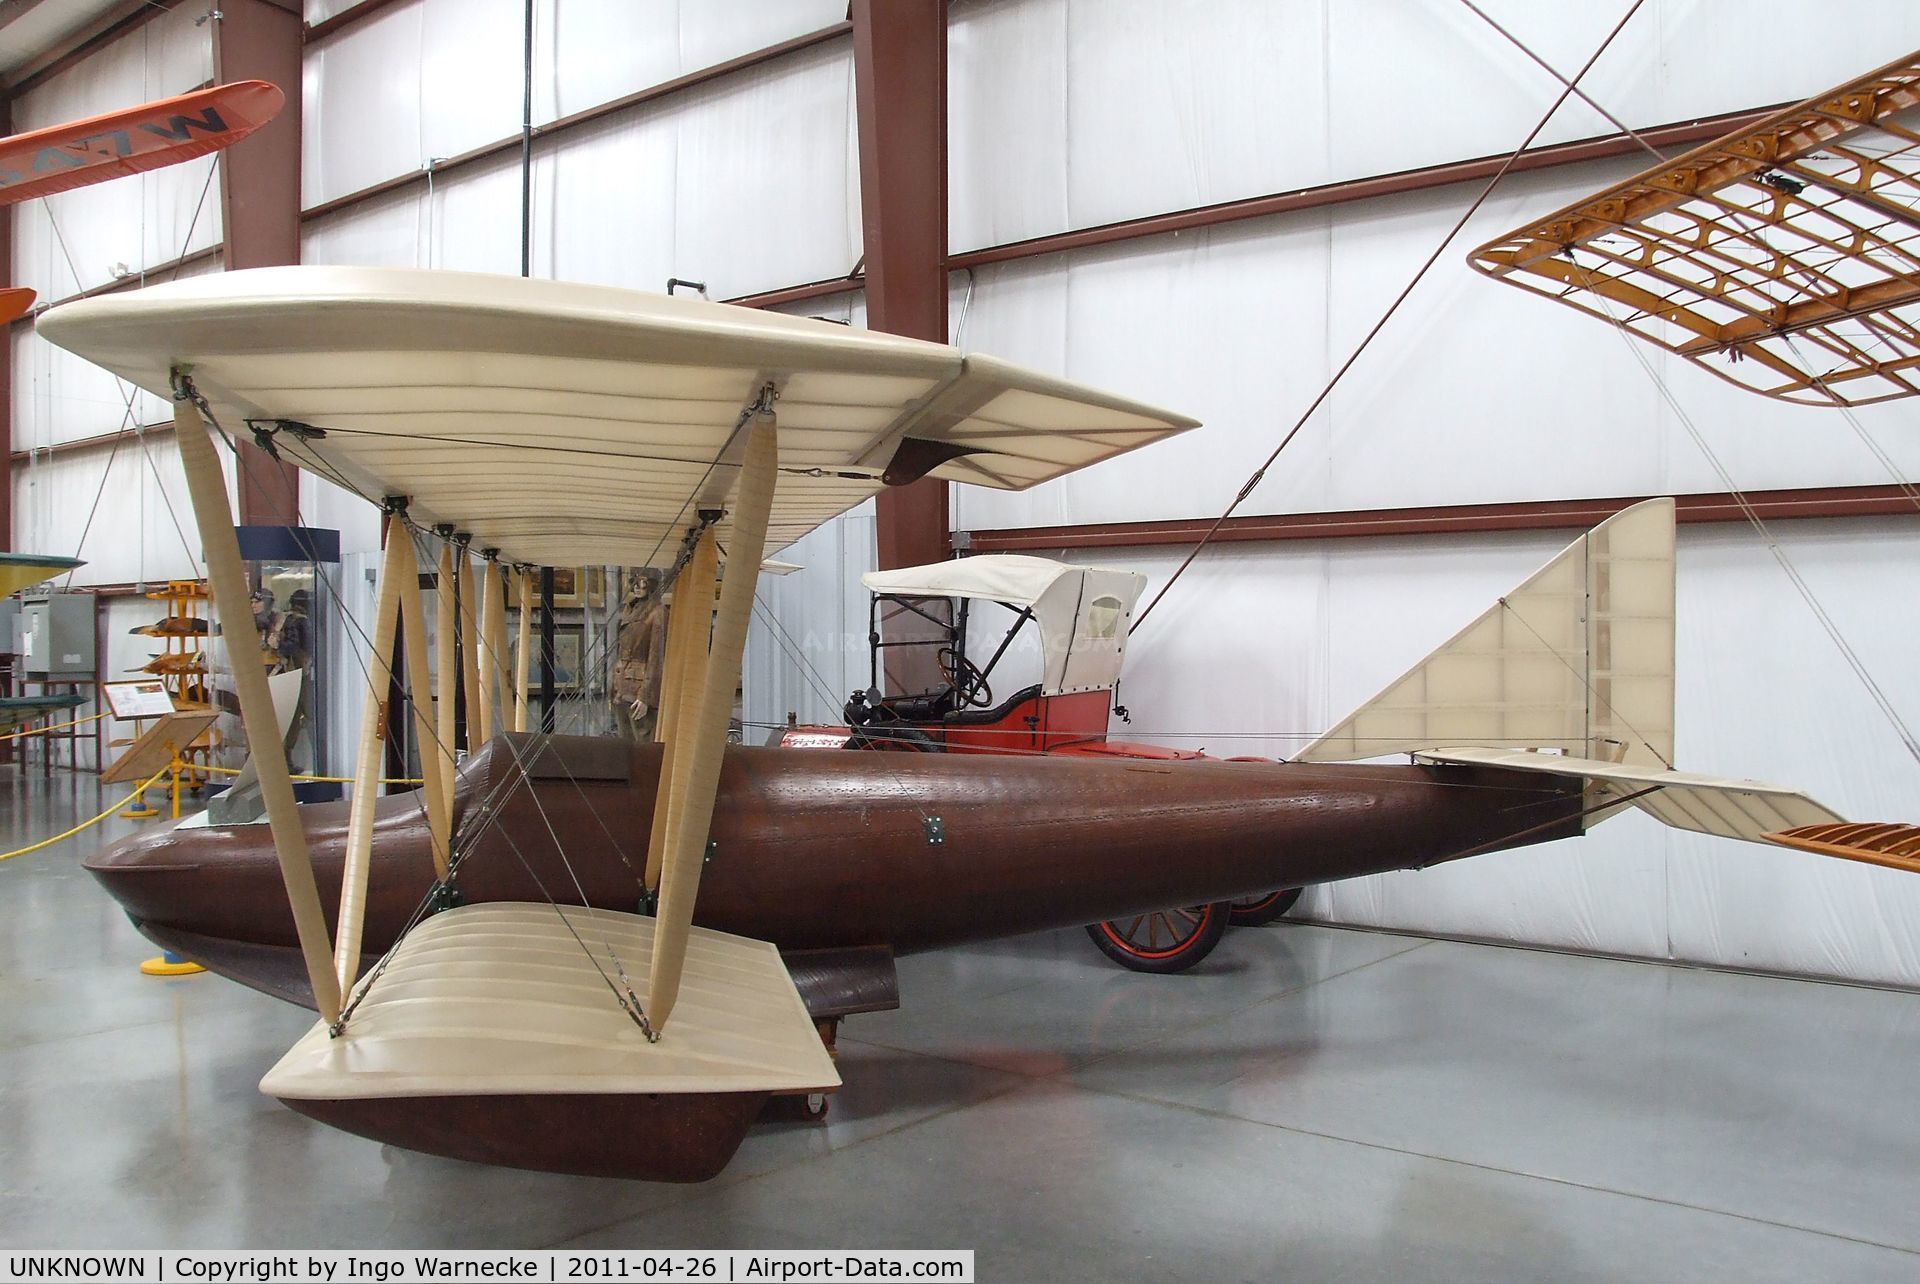 UNKNOWN, 1920 Thomas-Pigeon Flying Boat C/N unknown, Thomas-Pigeon Flying Boat at the Yanks Air Museum, Chino CA